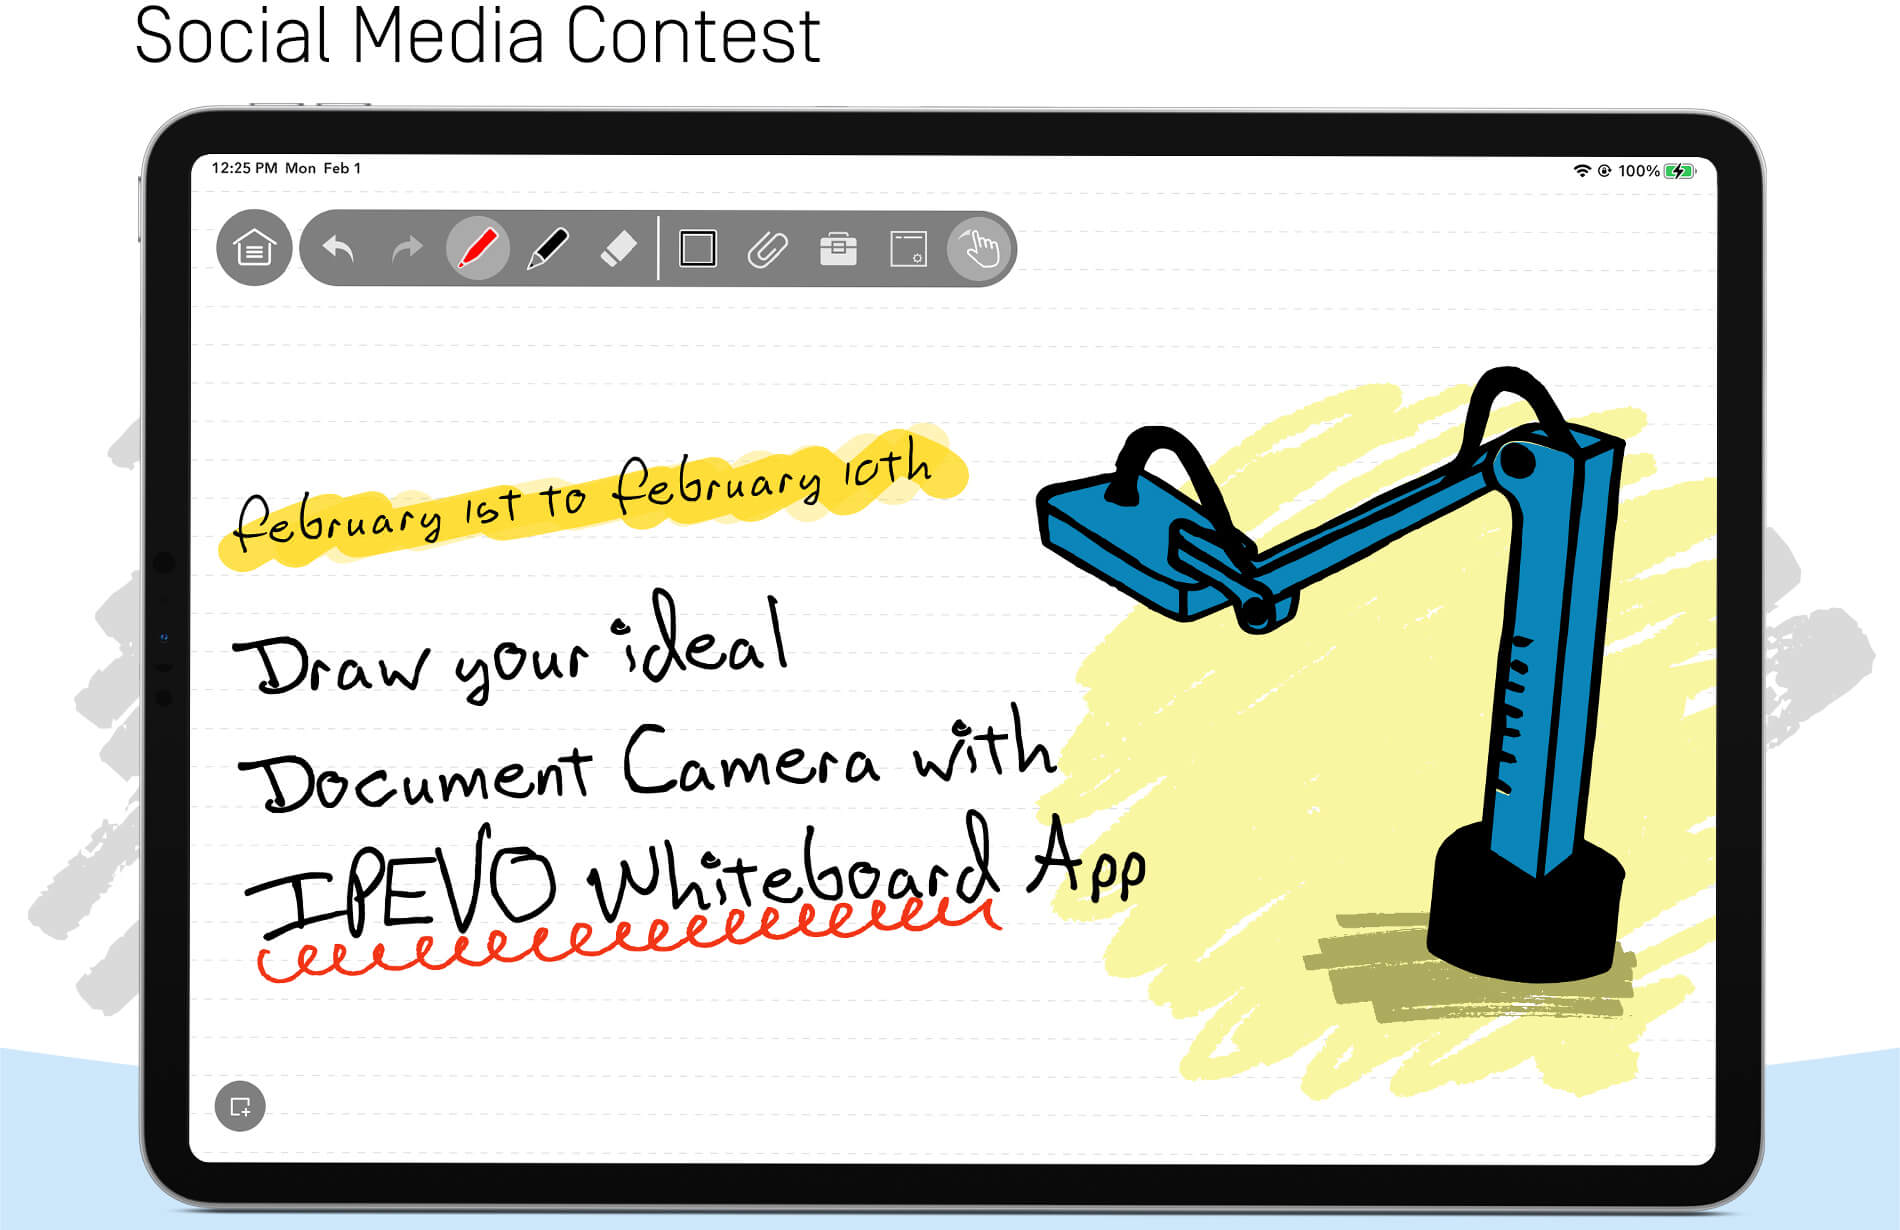 Social Media Contest - Draw your ideal Document Camera with IPEVO Whiteboard App. February 1st to February 10th.